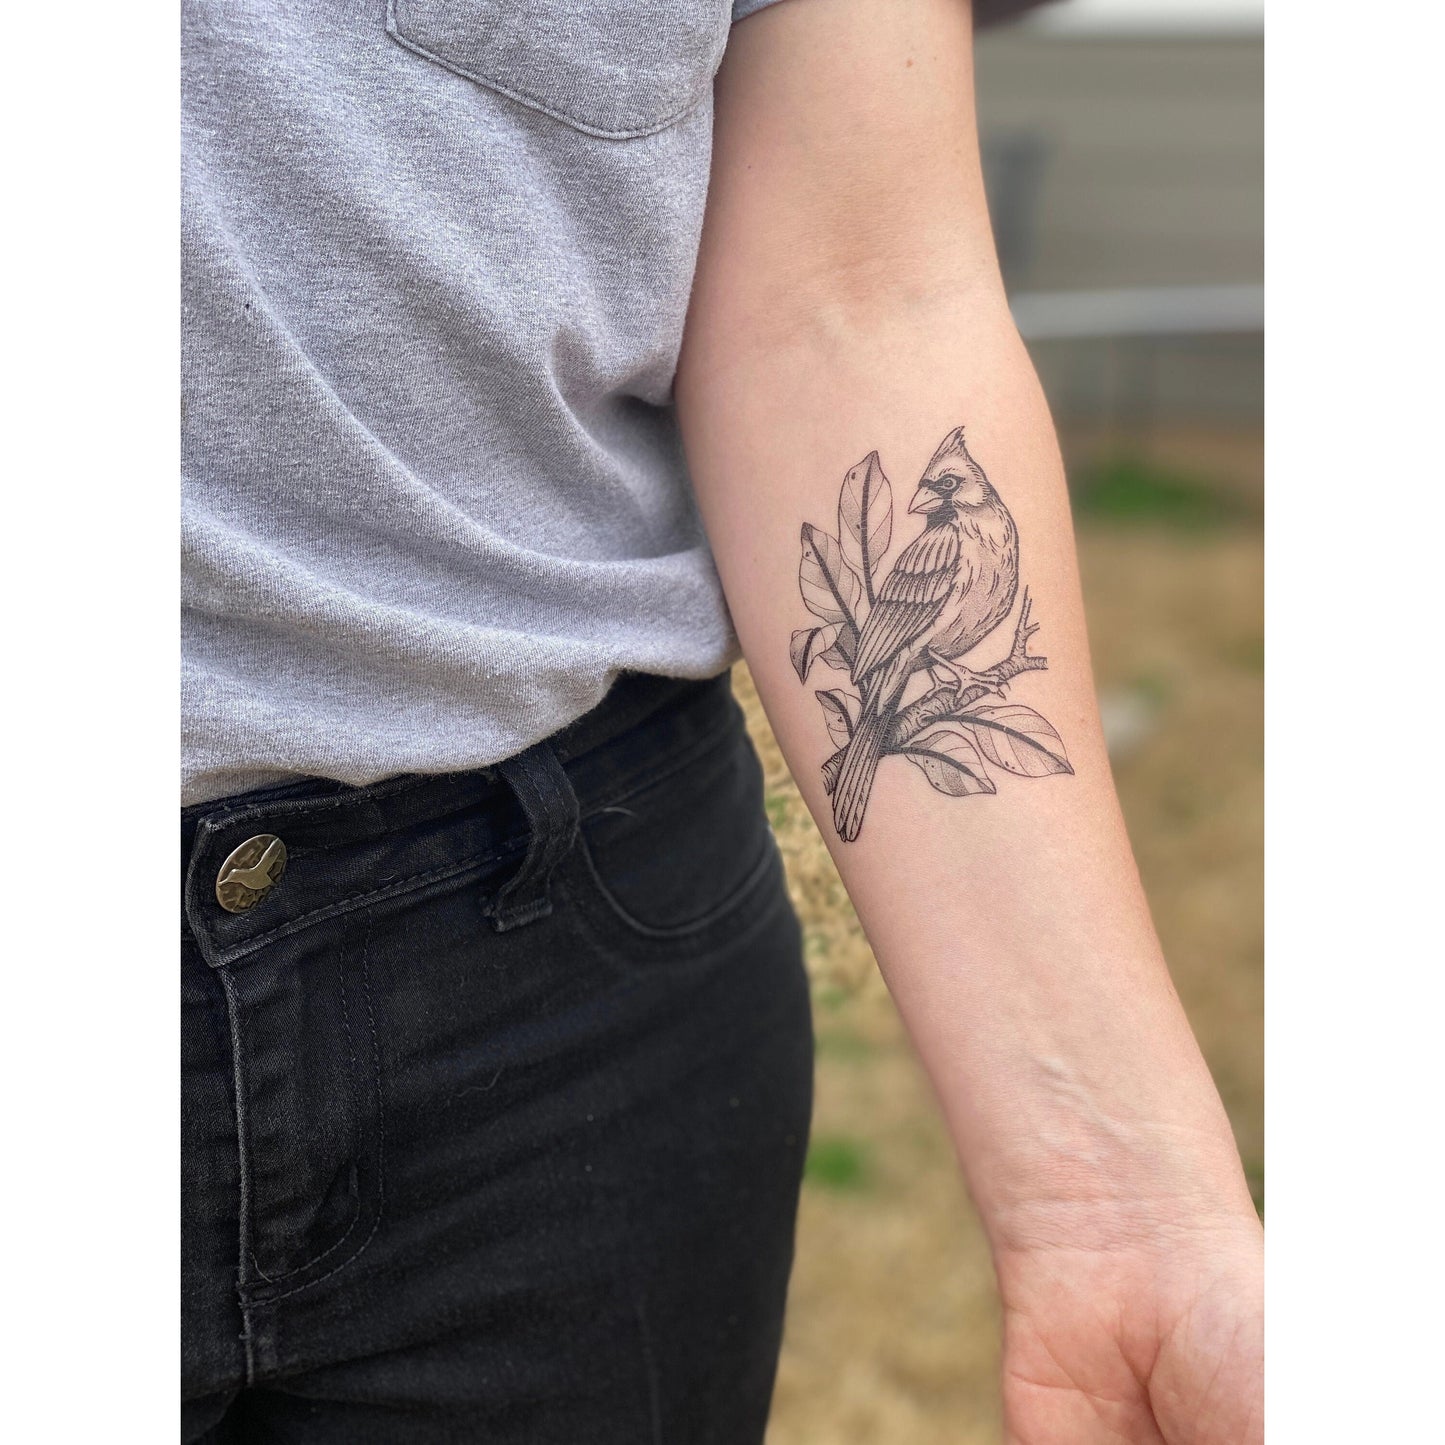 Flower Plant | Boston Temporary Tattoos: Get Tatted Now, Not Forever